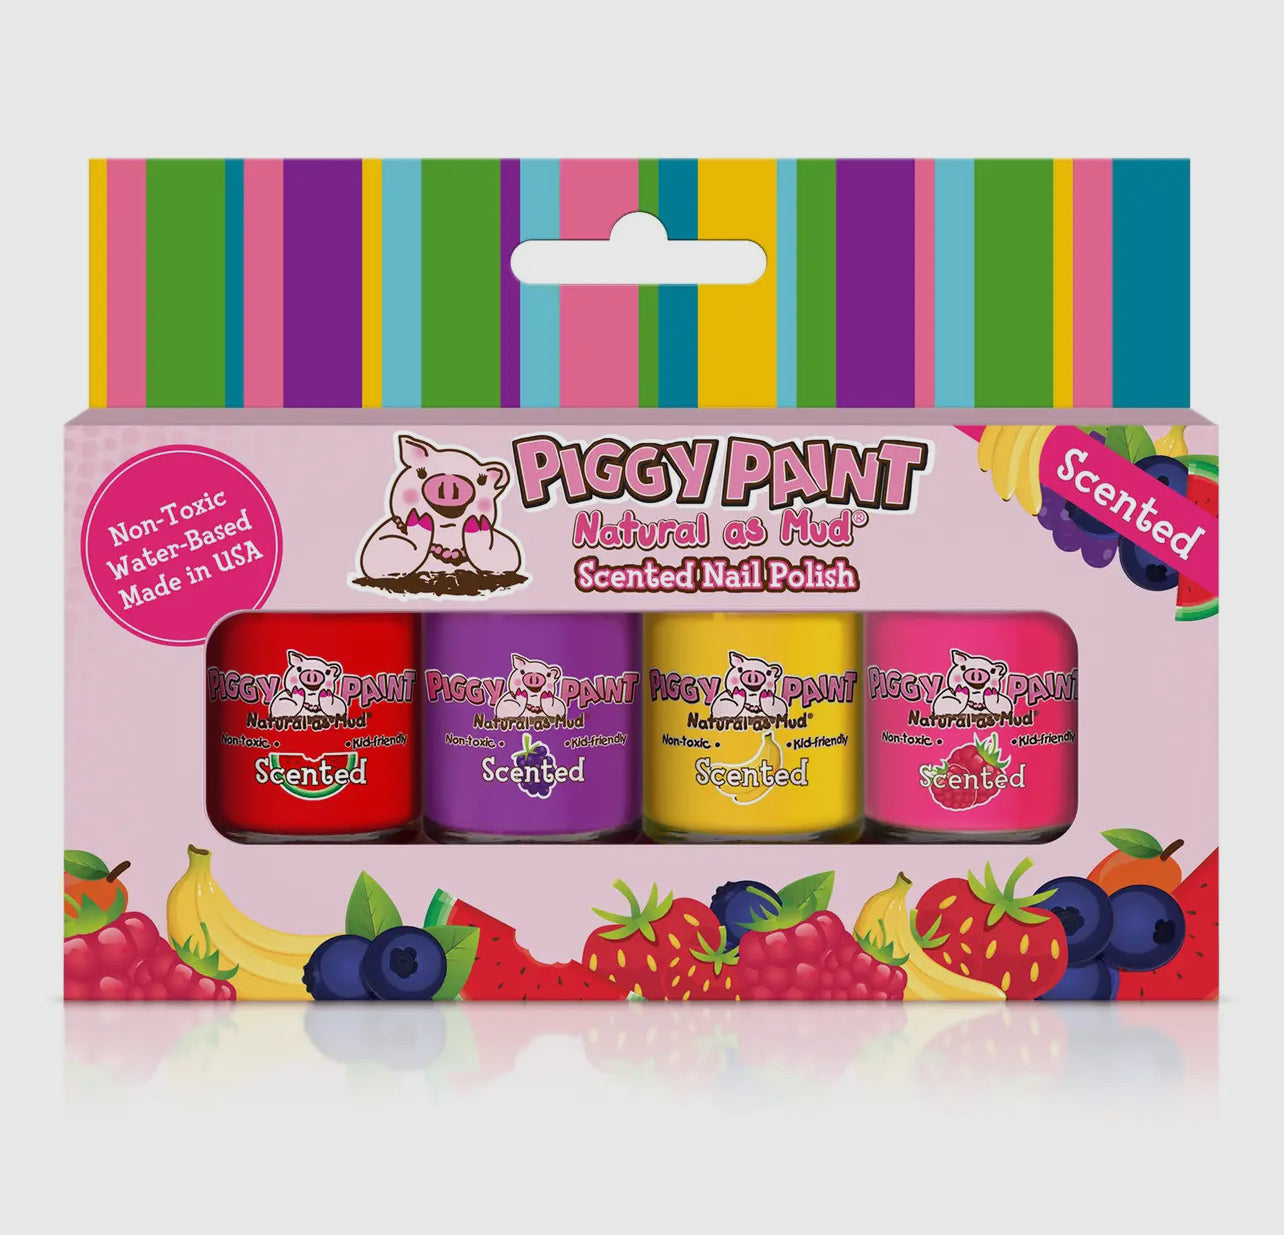 Piggy Paint - Scented Silly Unicorns Set